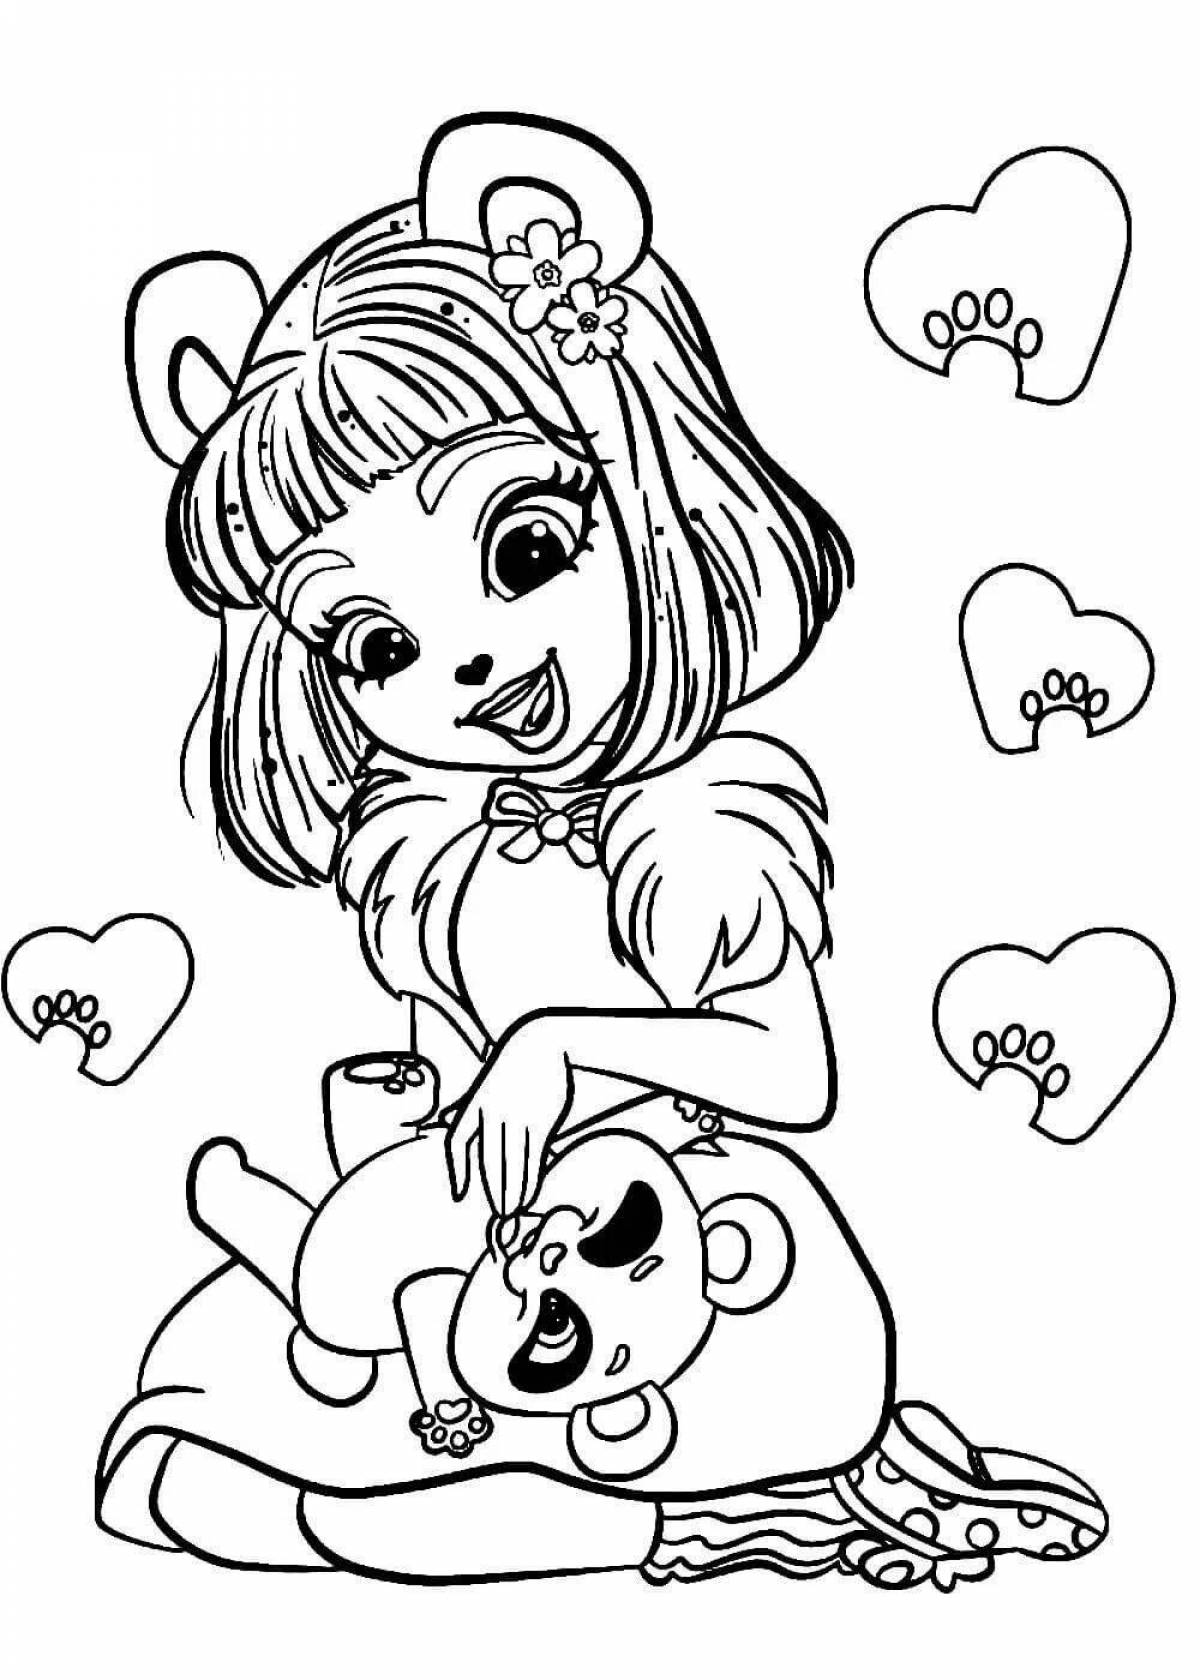 Adorable chachimole coloring page